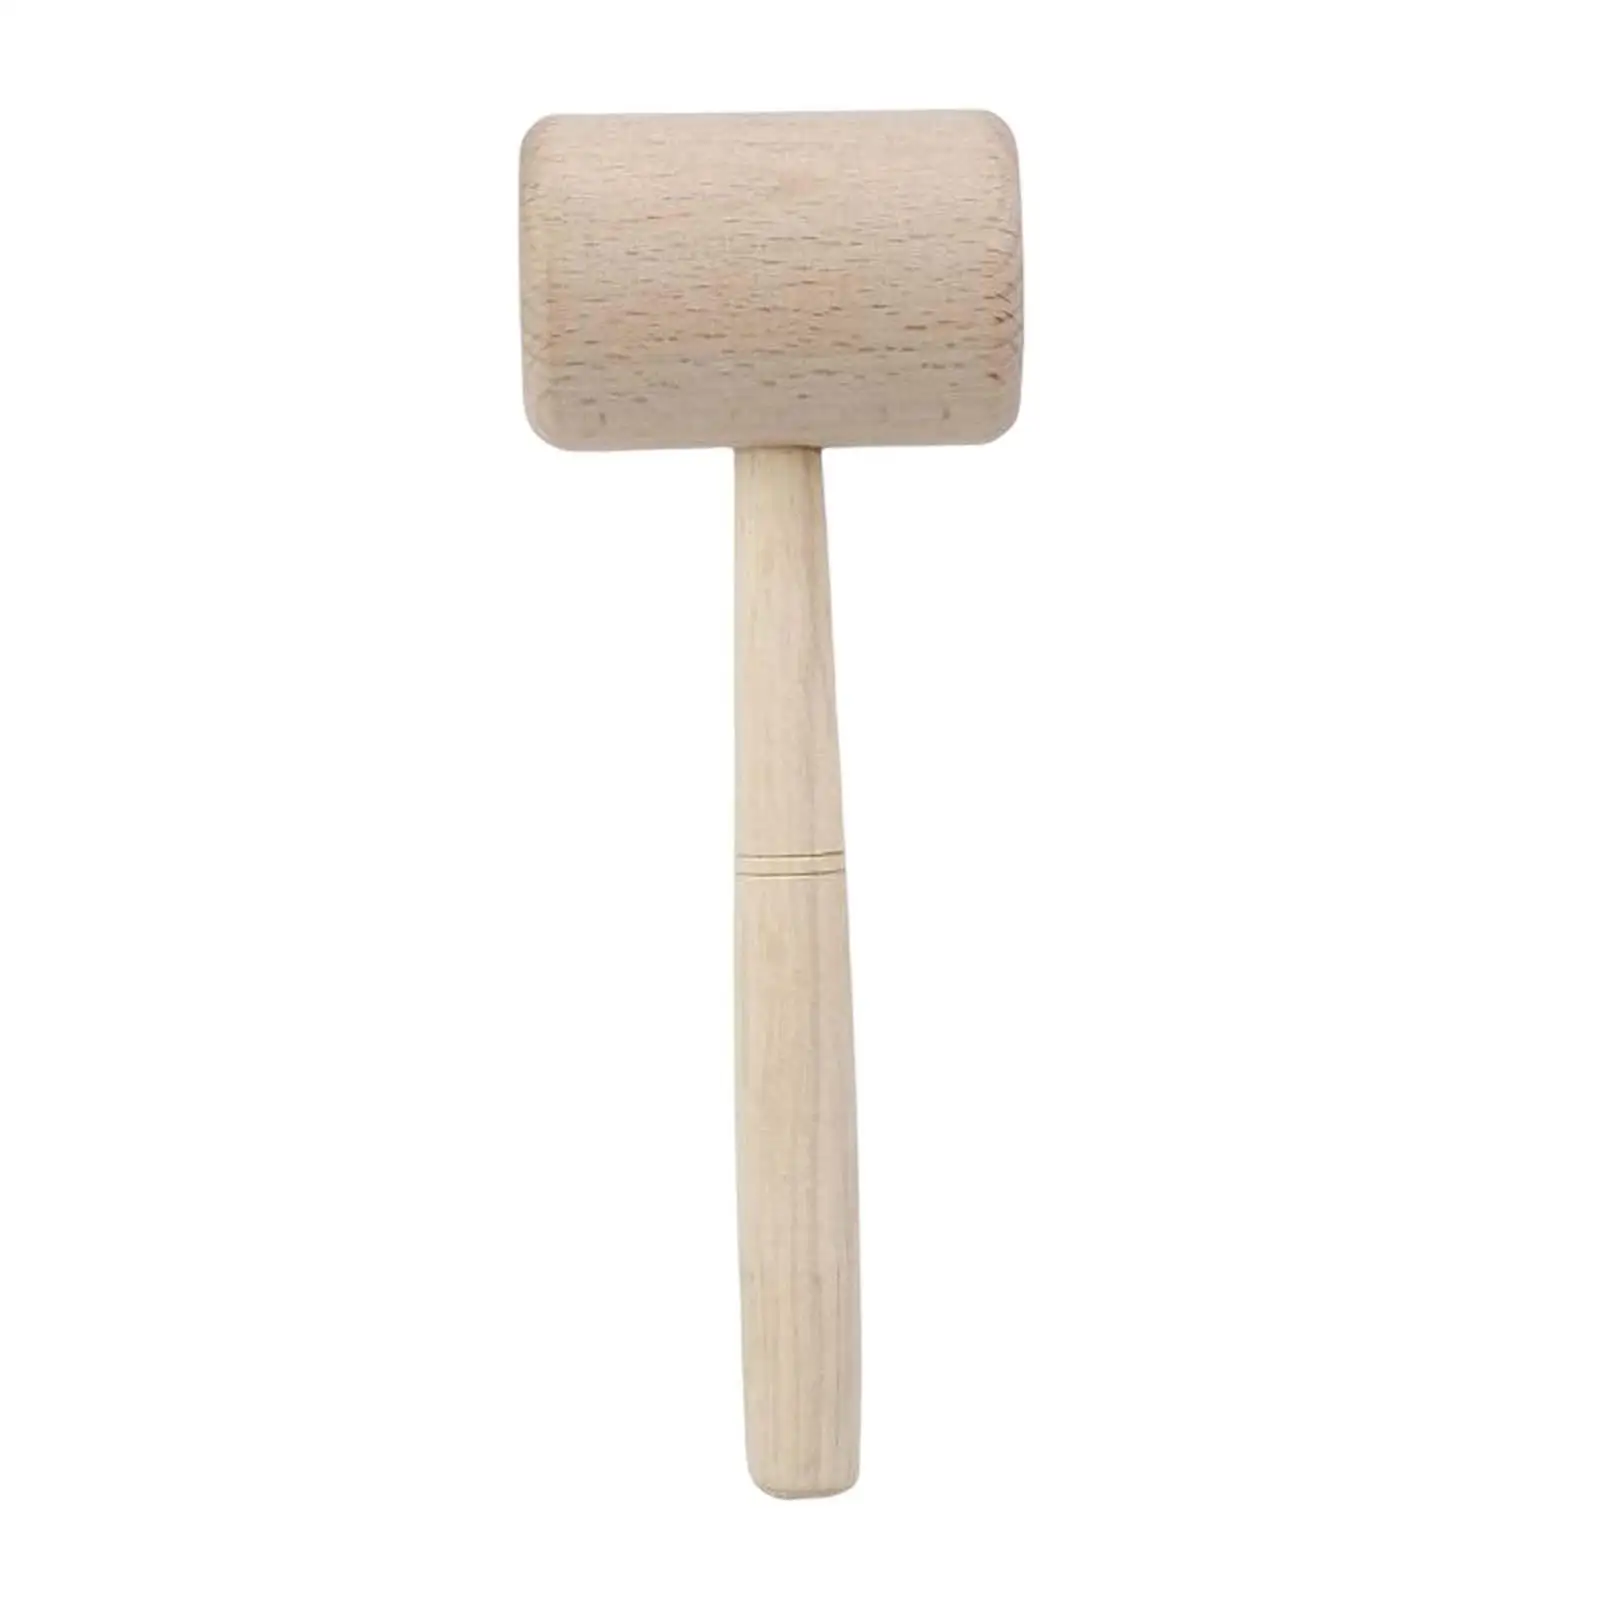 Beech Solid Wood Mallet Professional Woodworking Hammer Hand Hammer Accessory Vintage Wooden Mallet Wooden Hammer for Leather